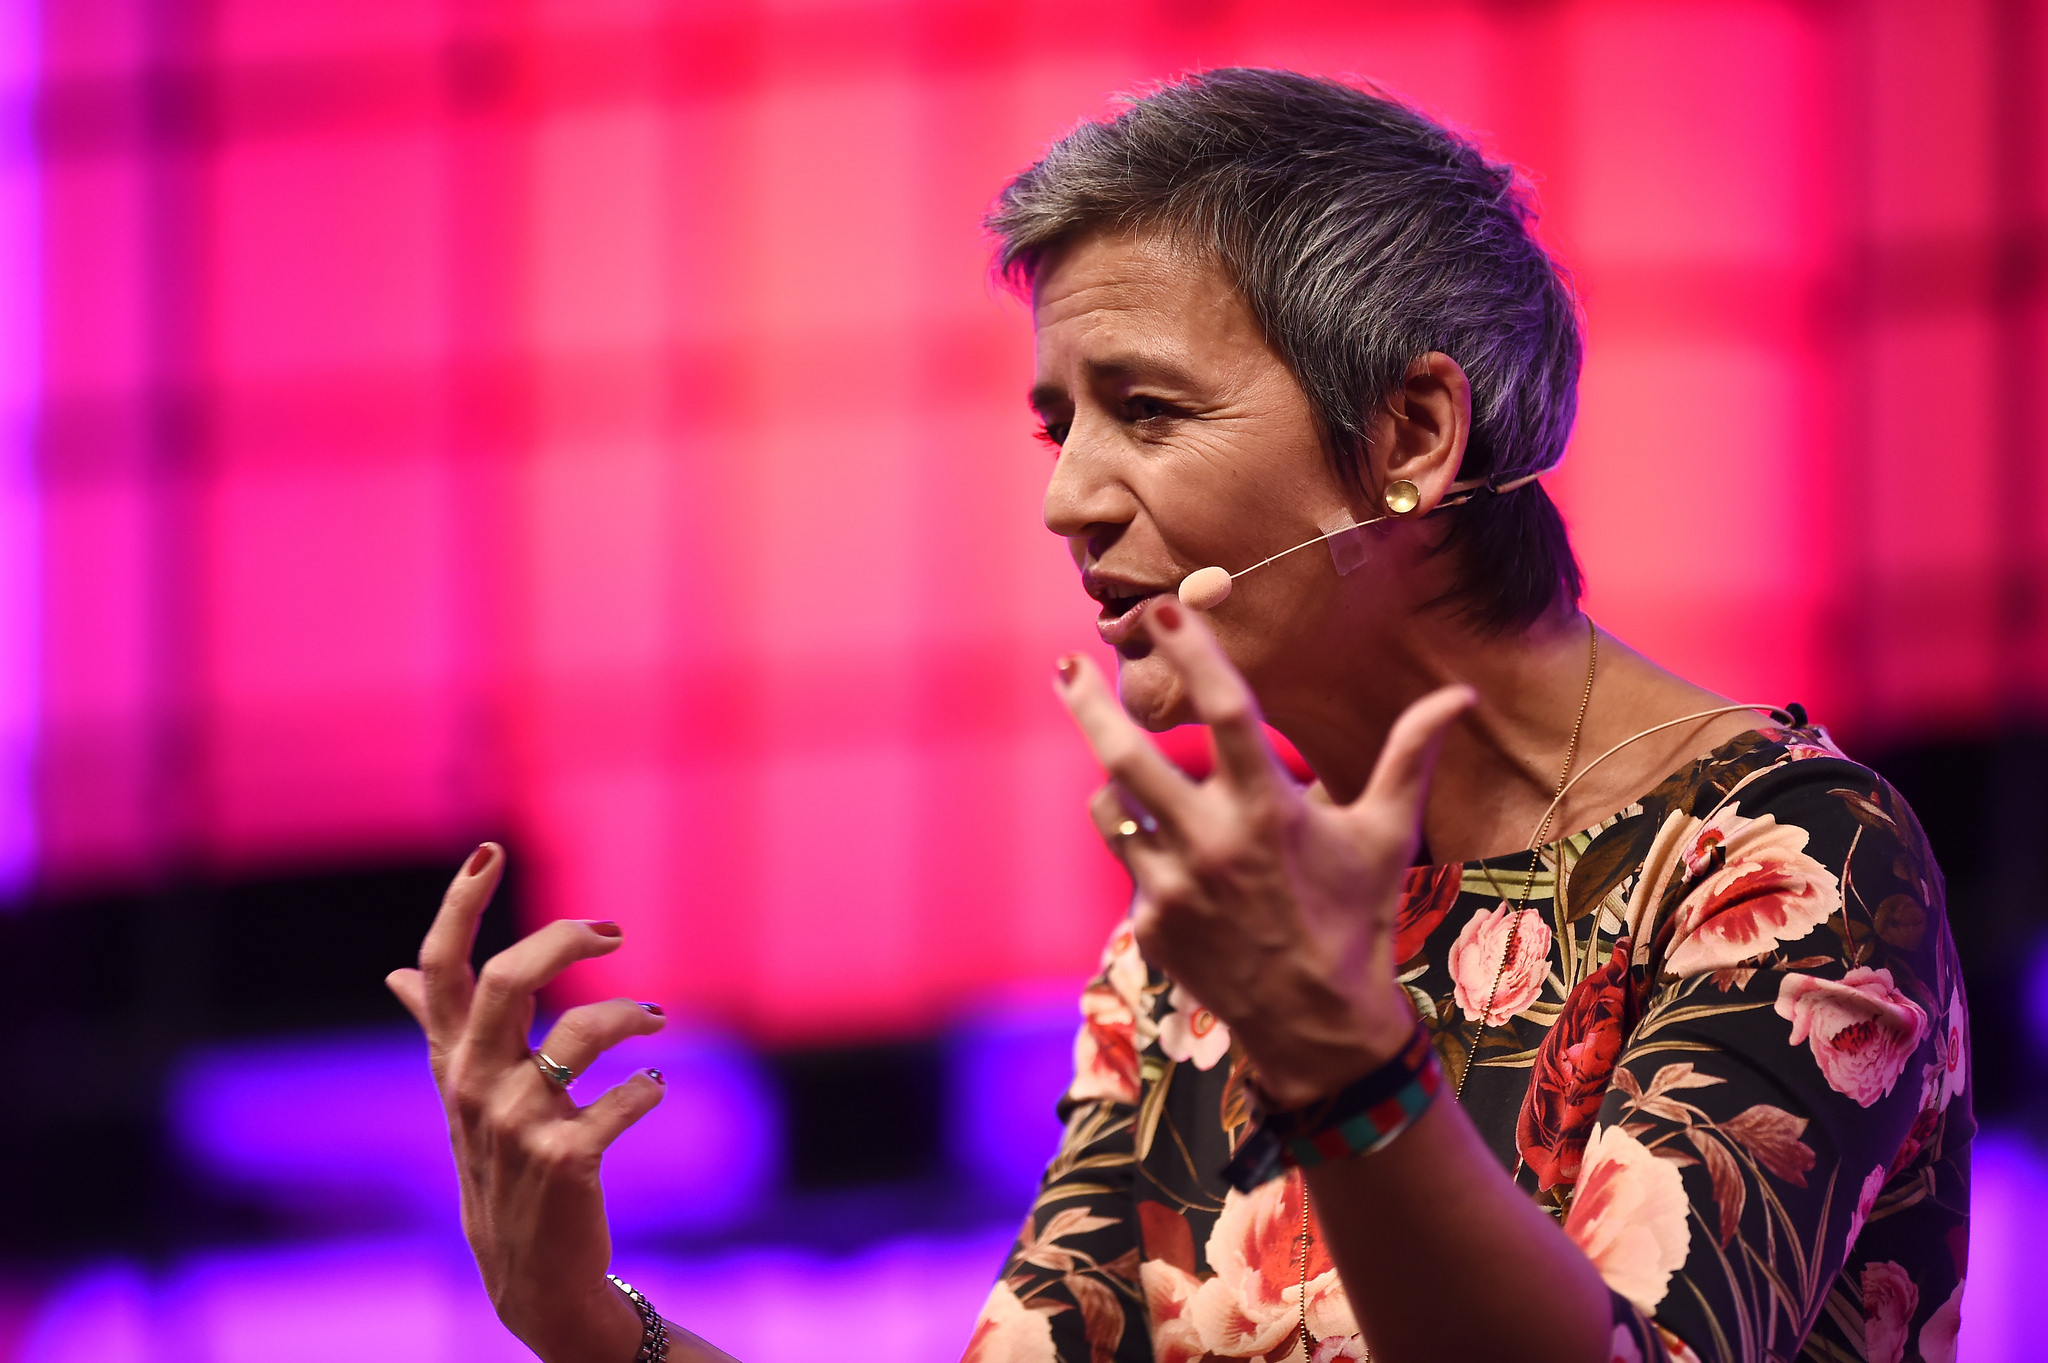 Europe's Commissioner for Competition, Margrethe Vestager, at the 2017 Web Summit in Lisbon, Portugal